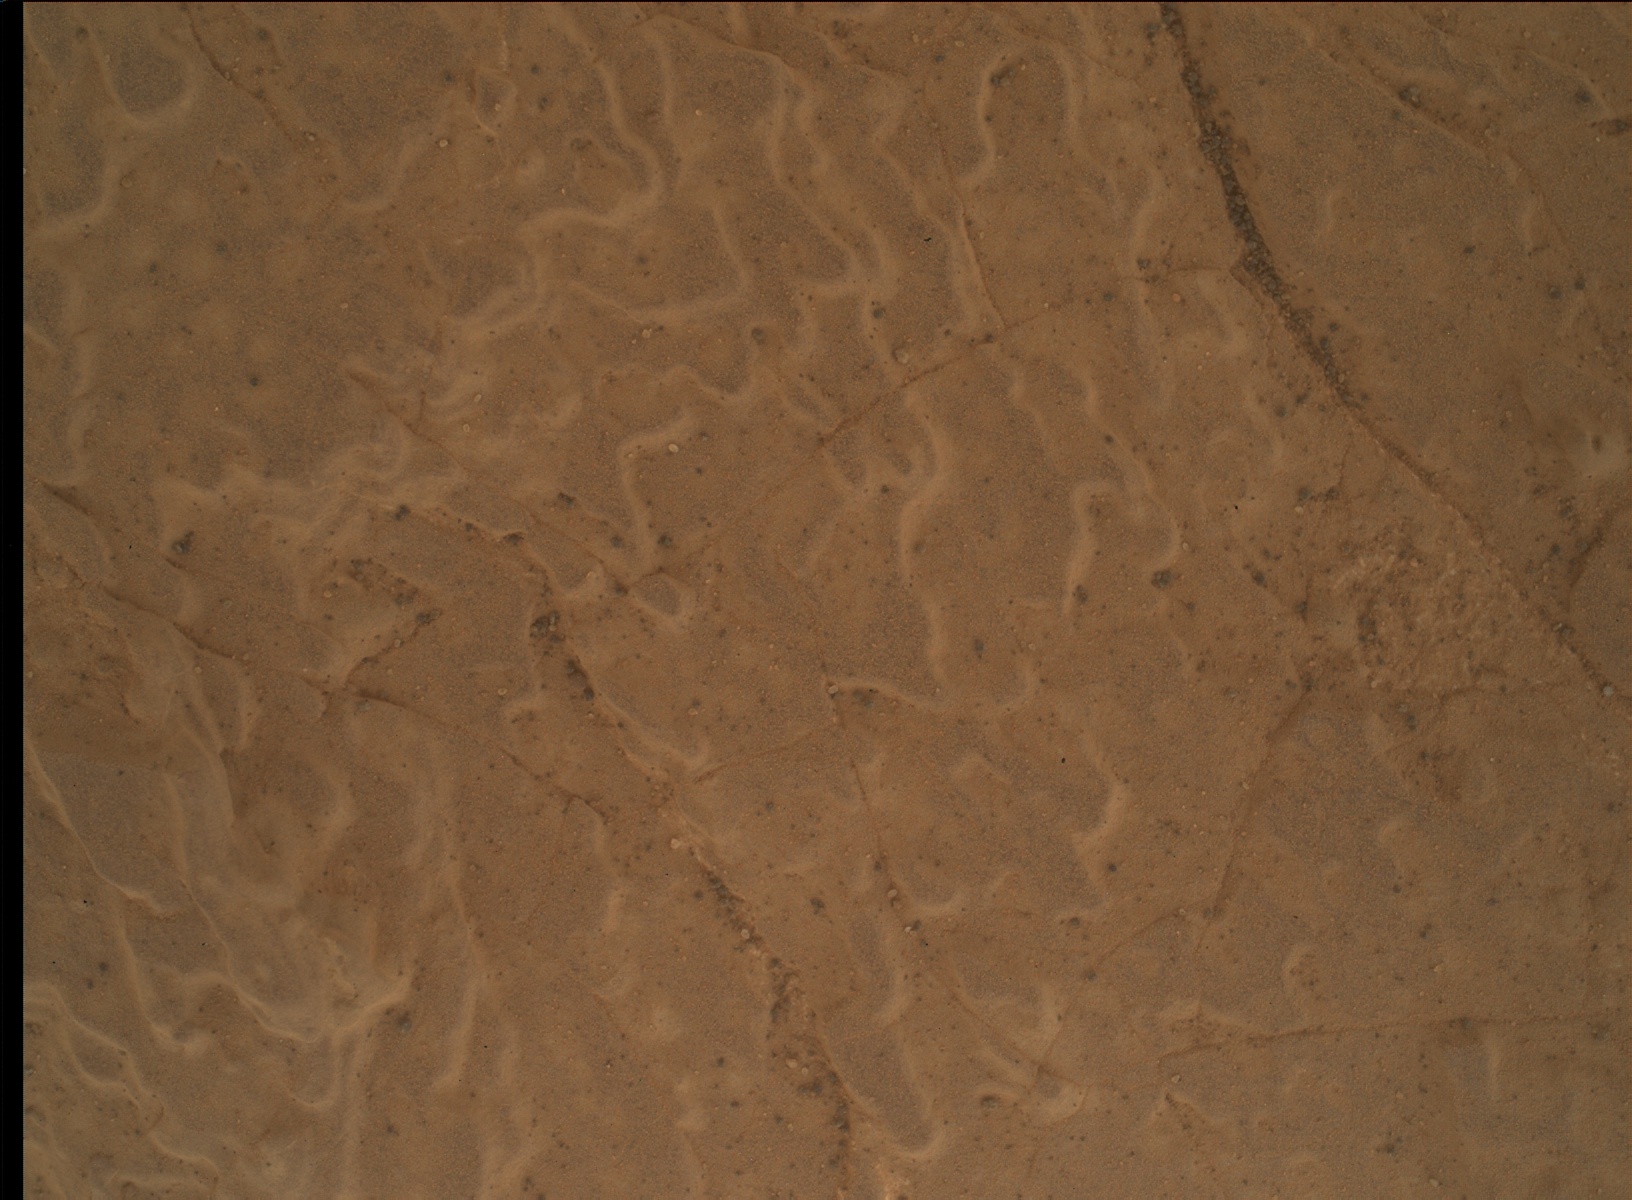 Nasa's Mars rover Curiosity acquired this image using its Mars Hand Lens Imager (MAHLI) on Sol 3042